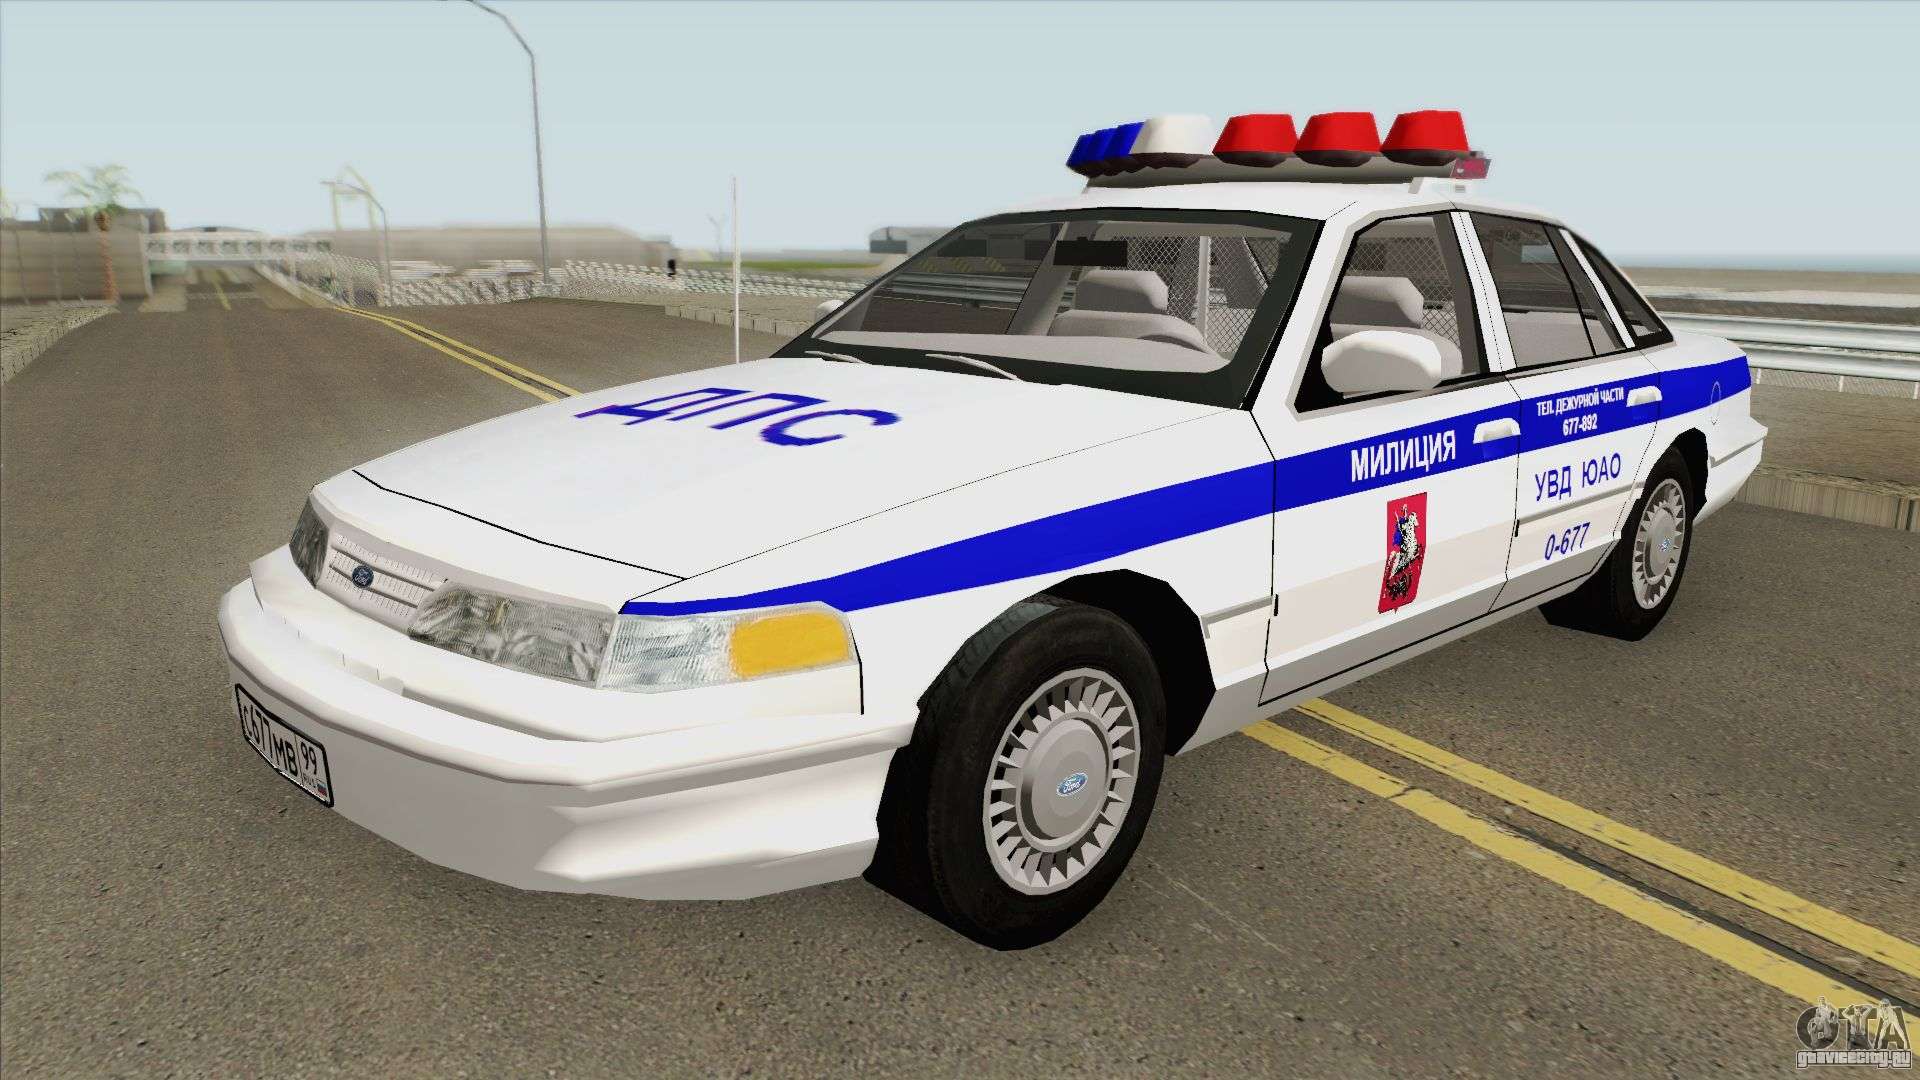 Ford Crown Victoria - Police (NFS MW Pepega) for GTA San Andreas